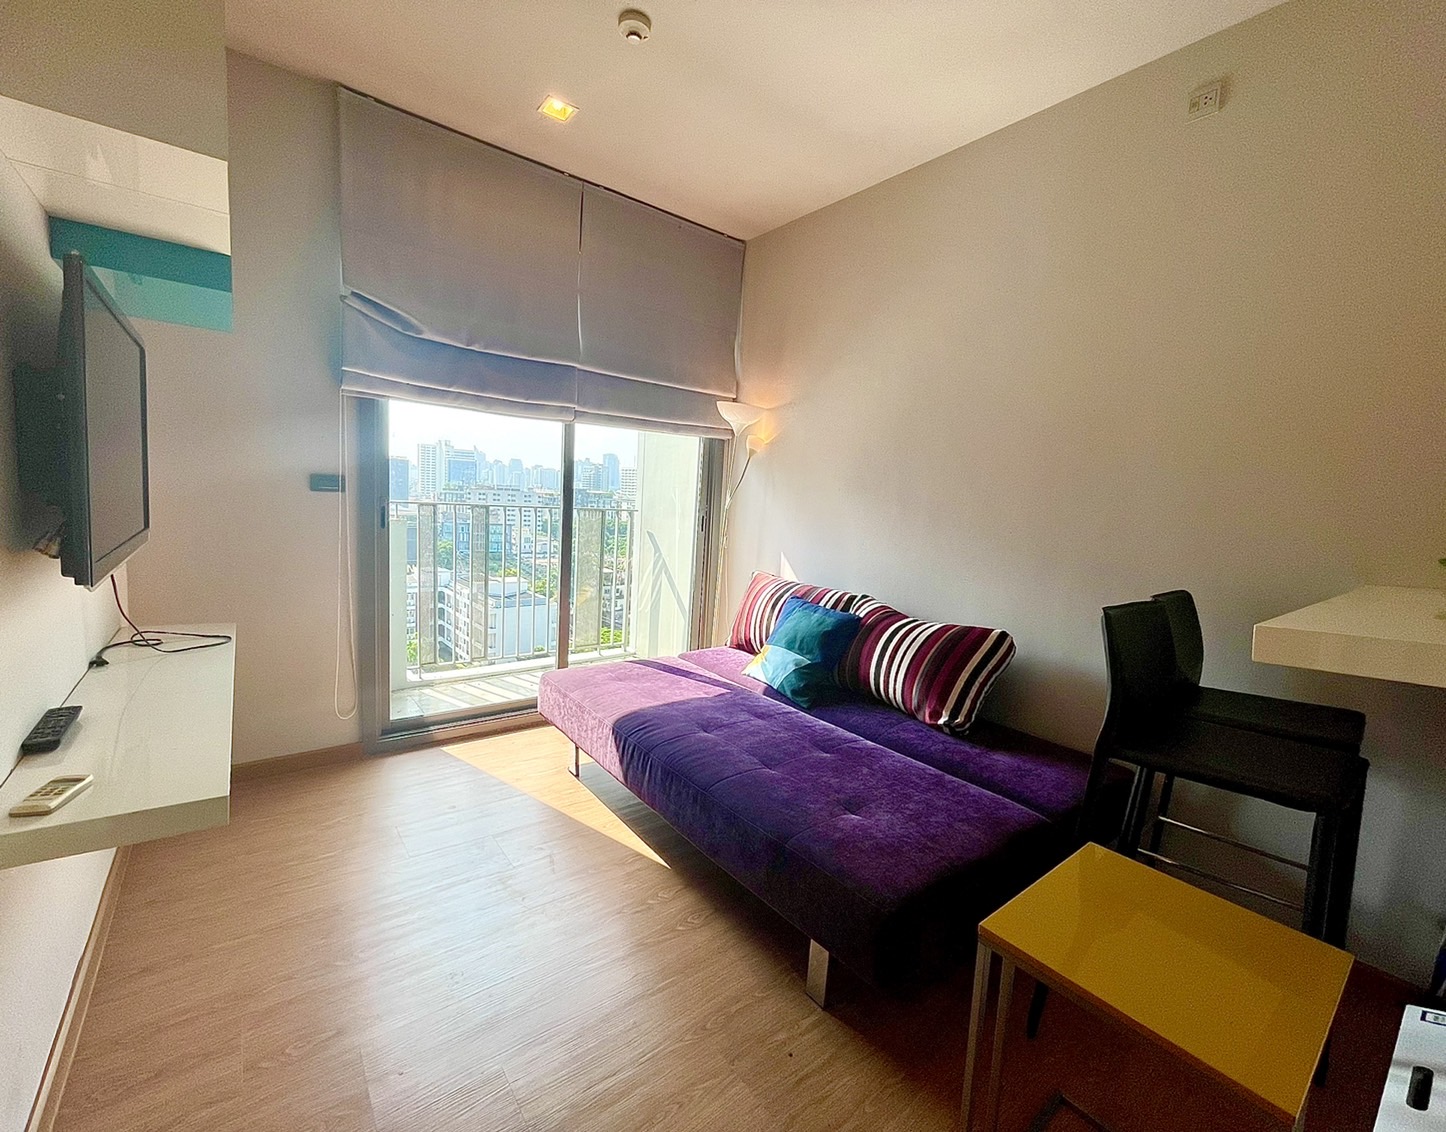 LOWEST PRICE in Project!! Fully Furnished Beautiful Unit for Sale at Ceil by Sansiri!! Located in between Ekkamai and Tonglor!!